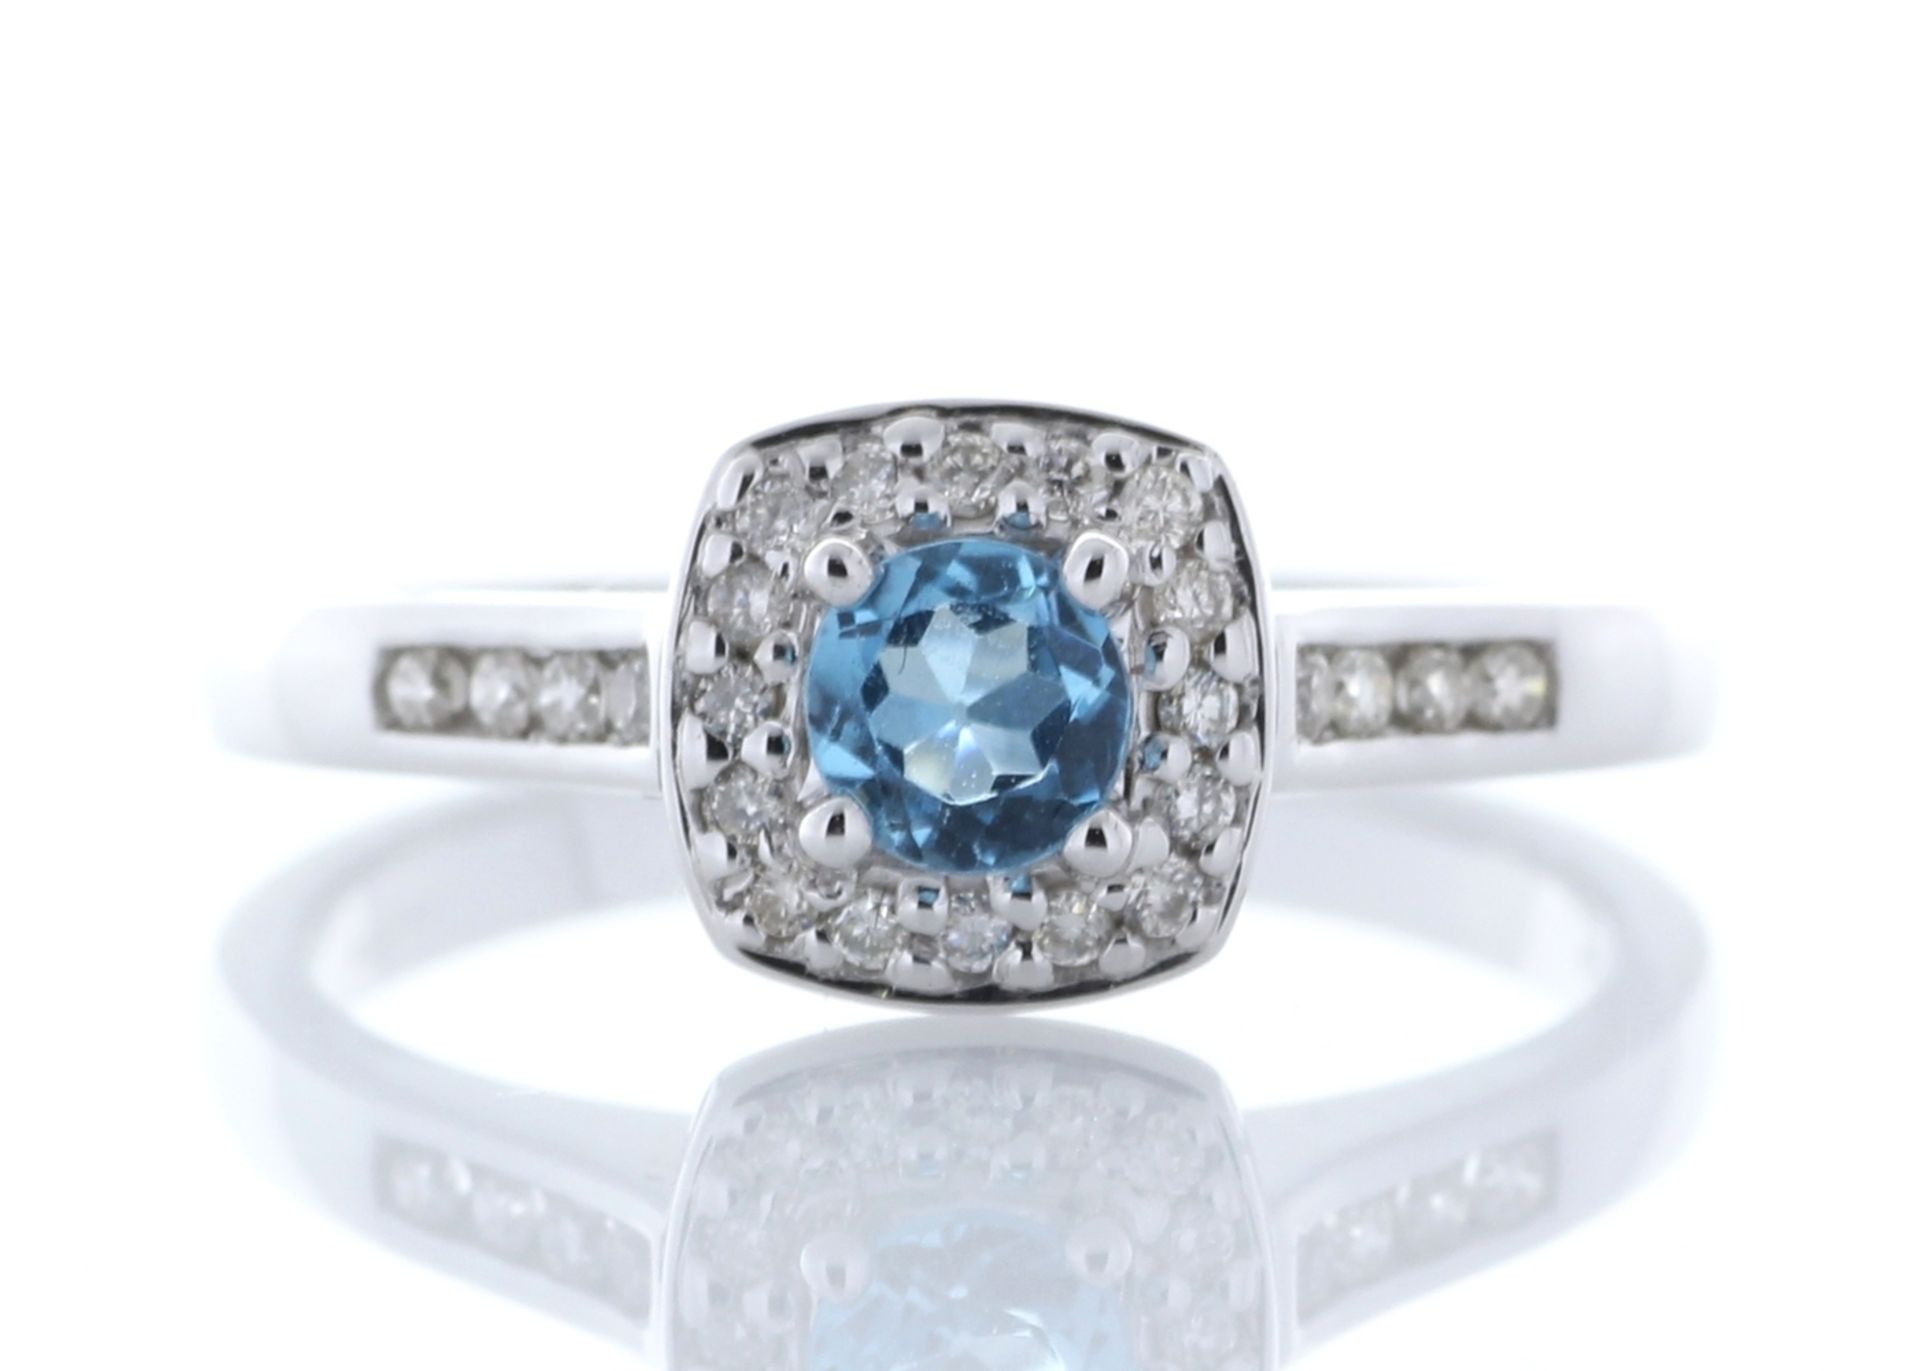 9ct White Gold Blue Topaz Diamond Halo Ring - Valued By GIE £2,850.00 - This gorgeous ring comes